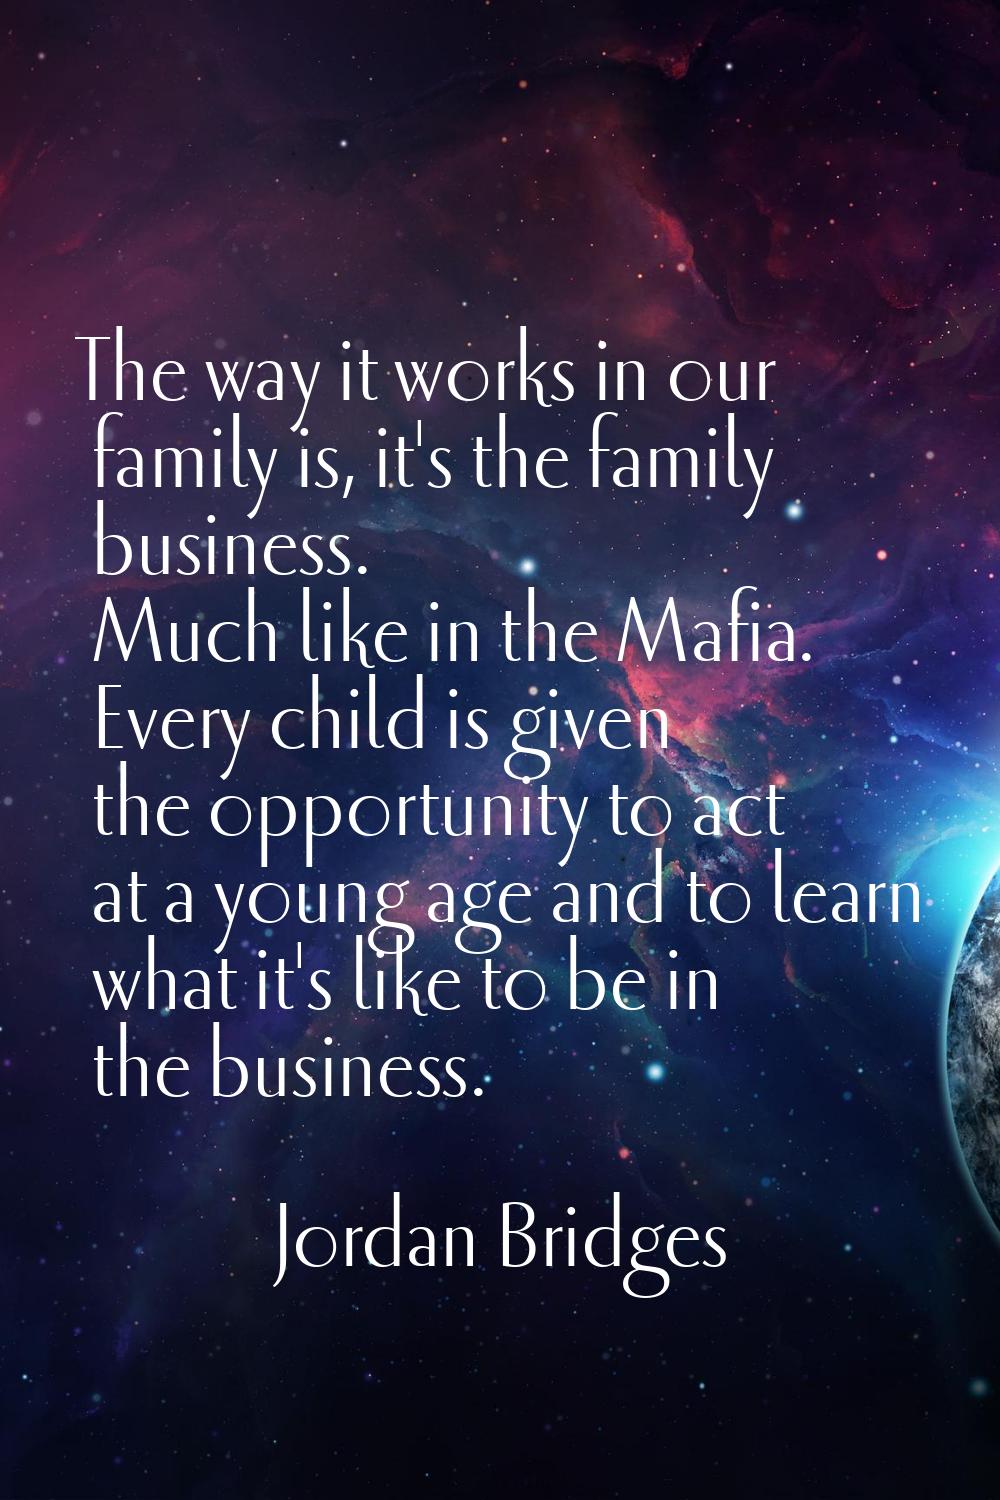 The way it works in our family is, it's the family business. Much like in the Mafia. Every child is